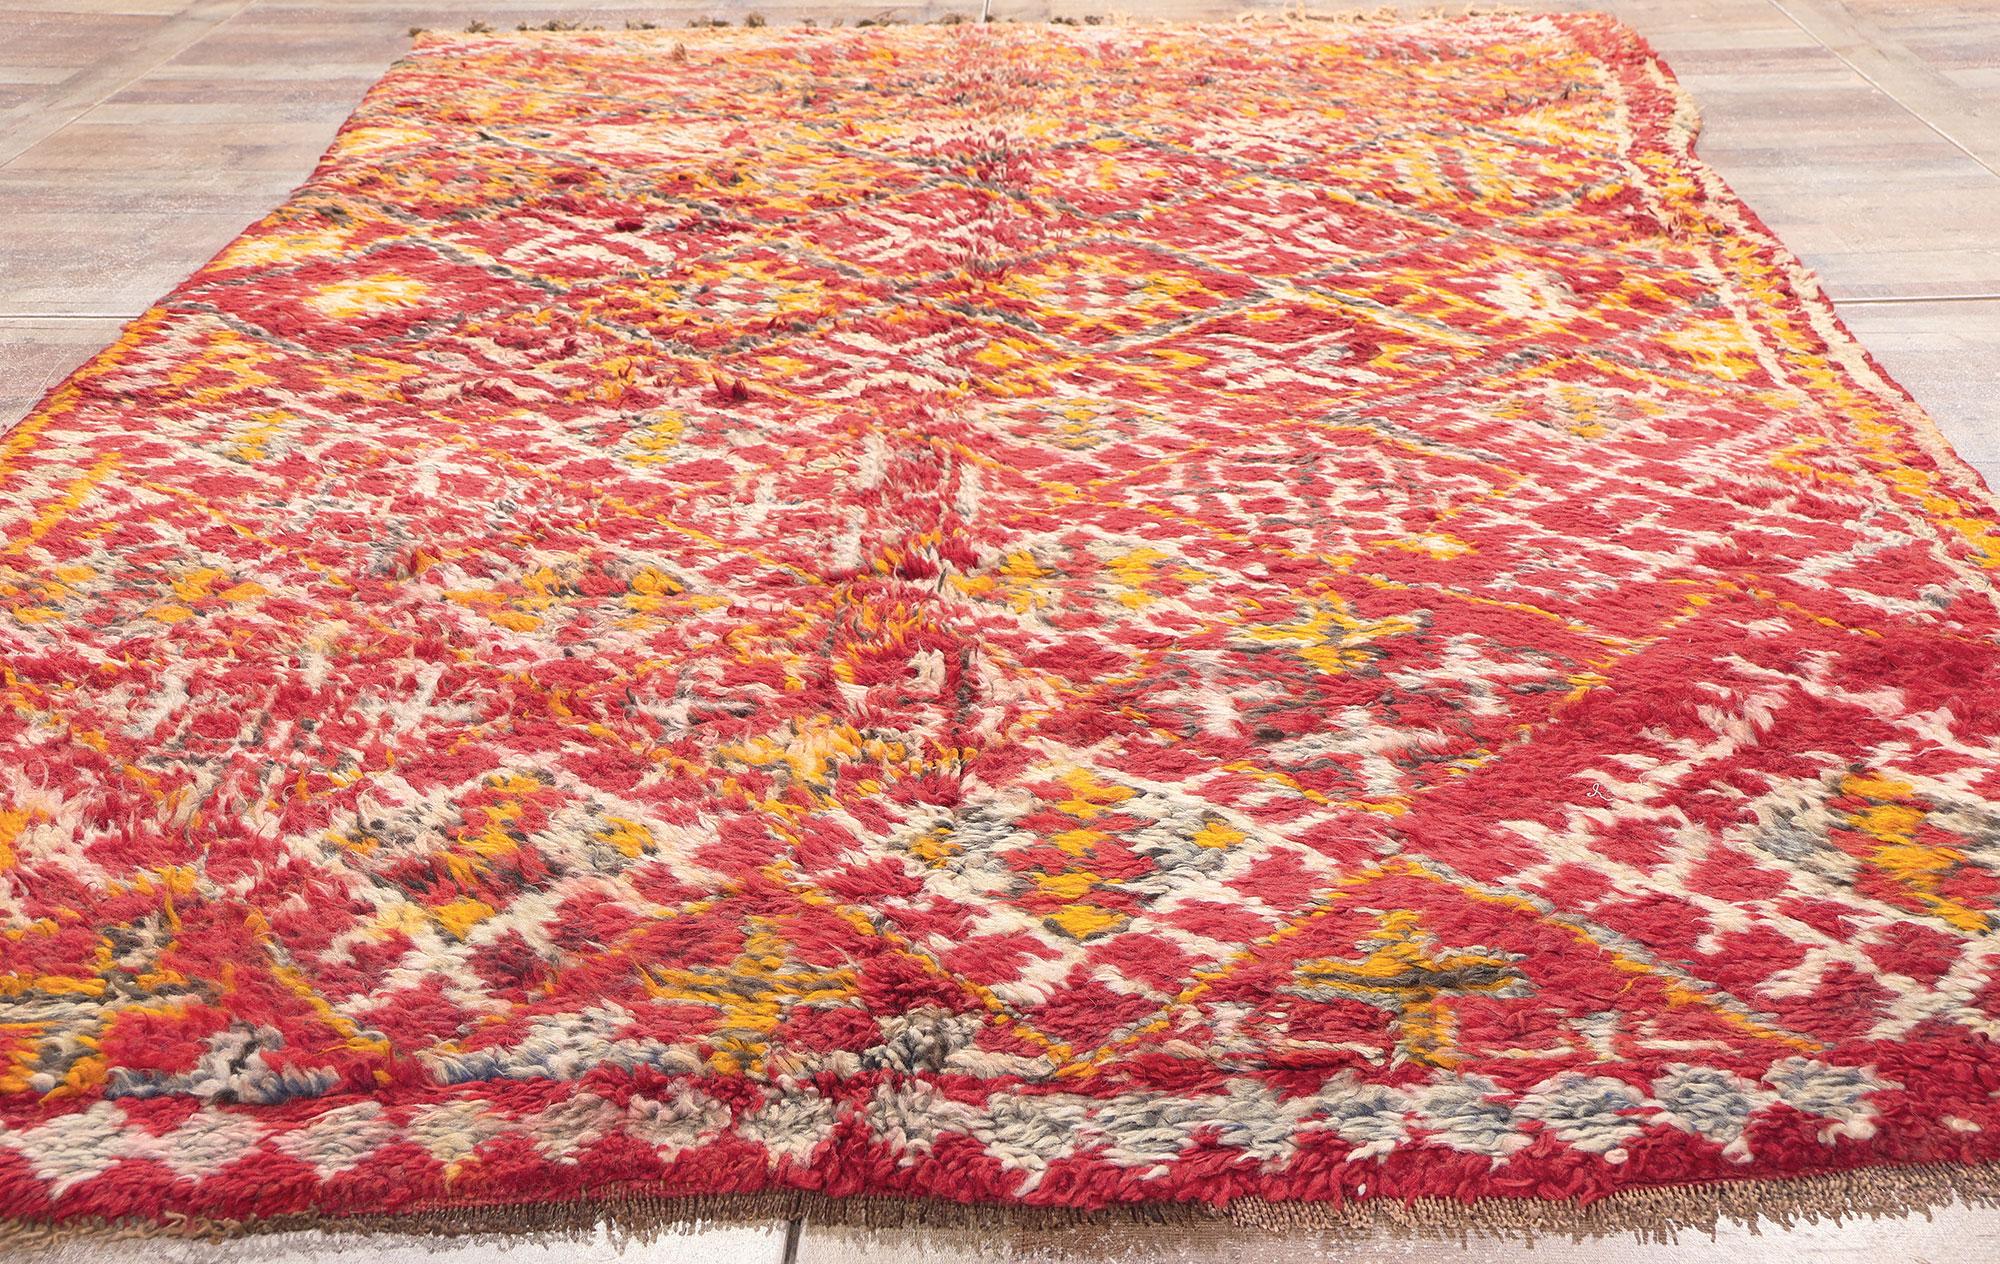 Vintage Beni MGuild Moroccan Rug, Midcentury Modern Meets Spicy Boho Chic For Sale 1